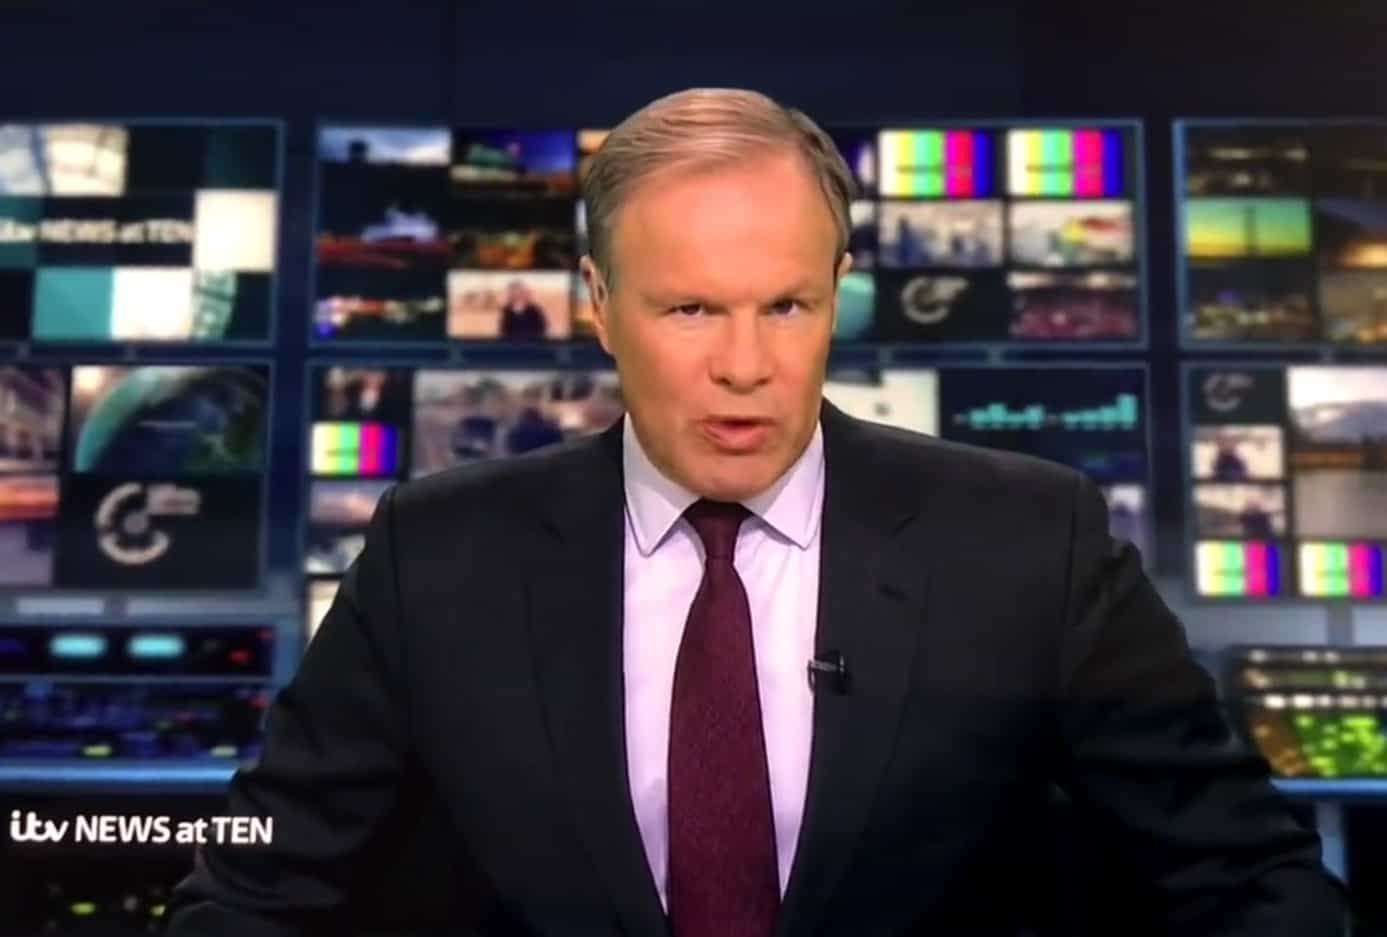 Memorable opening to ITV News bulletin goes viral